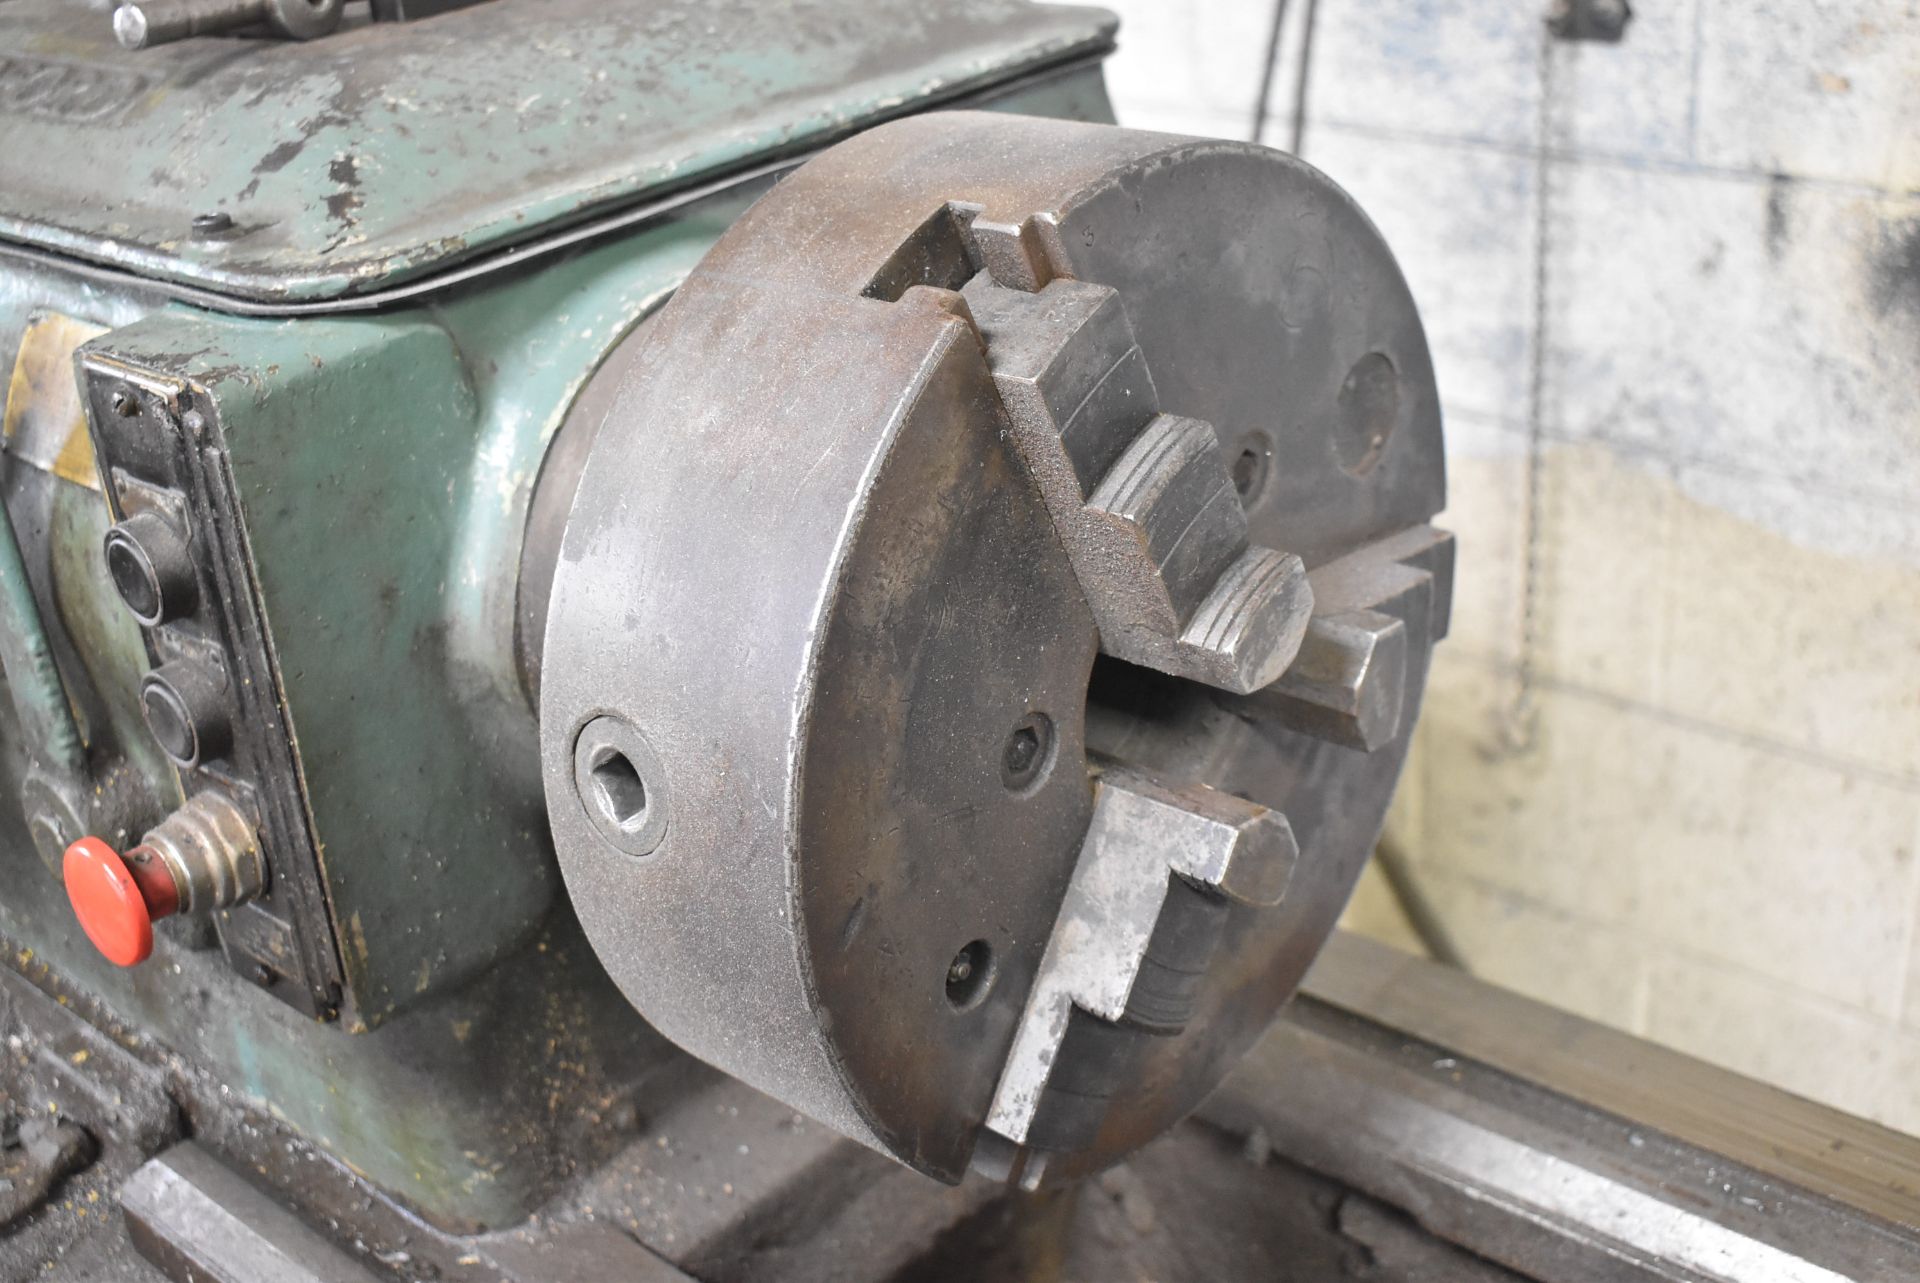 BRADFORD 18X100 ENGINE LATHE 18" SWING OVER BED, 100" DISTANCE BETWEEN CENTERS, 1.5" SPINDLE BORE, - Image 3 of 9